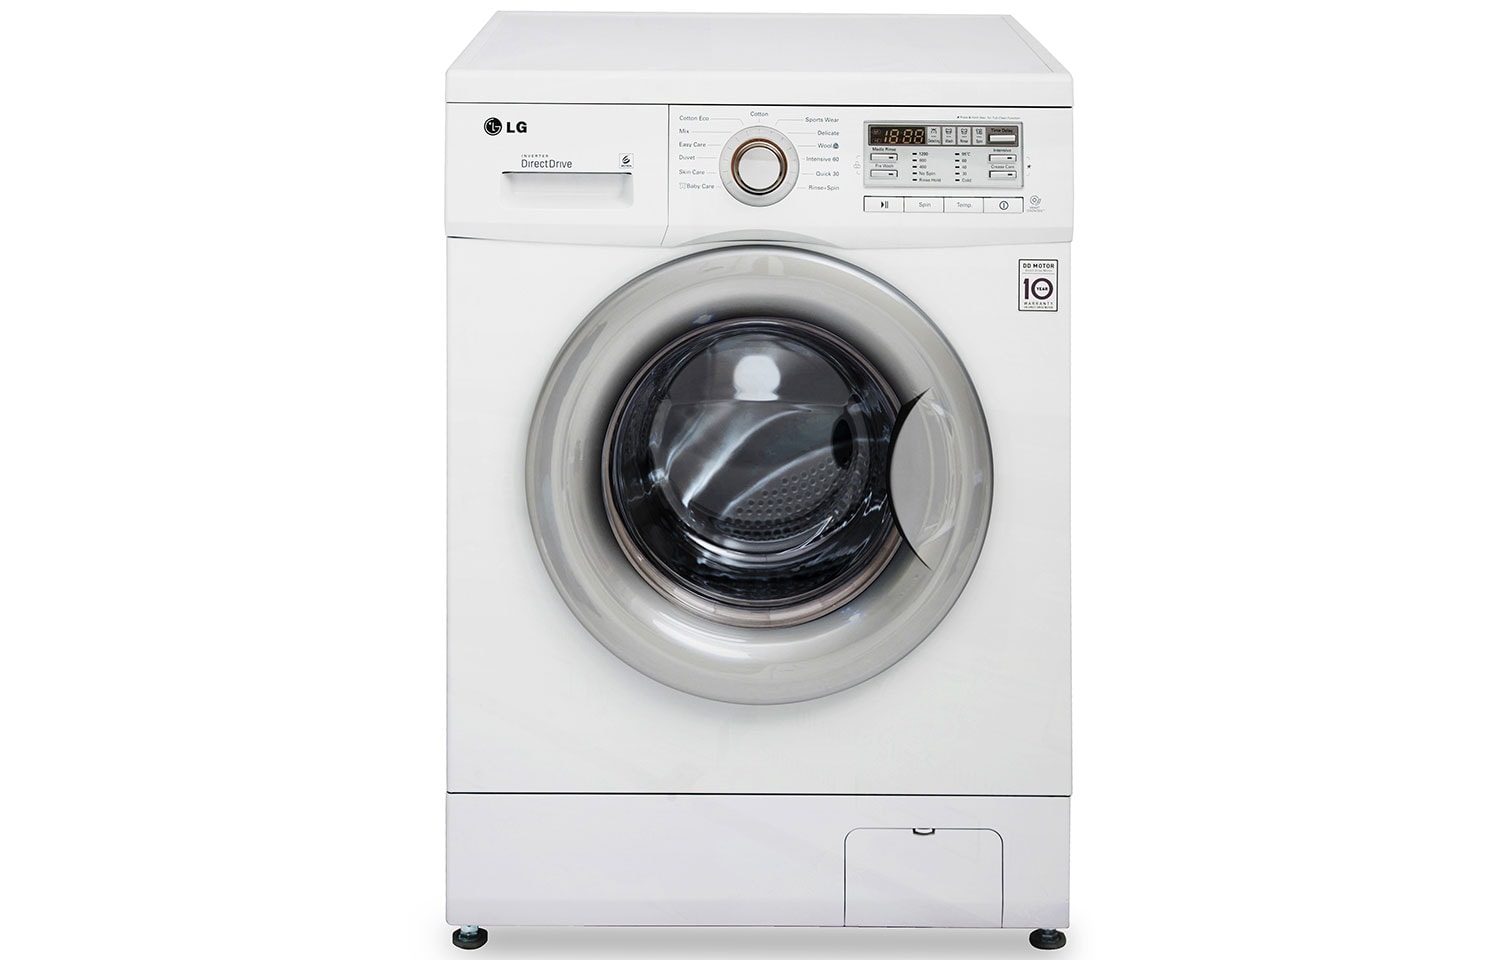 LG 7.5kg 6 MOTION DIRECT DRIVE FRONT LOAD WASHING MACHINE, WD-MD7500WM